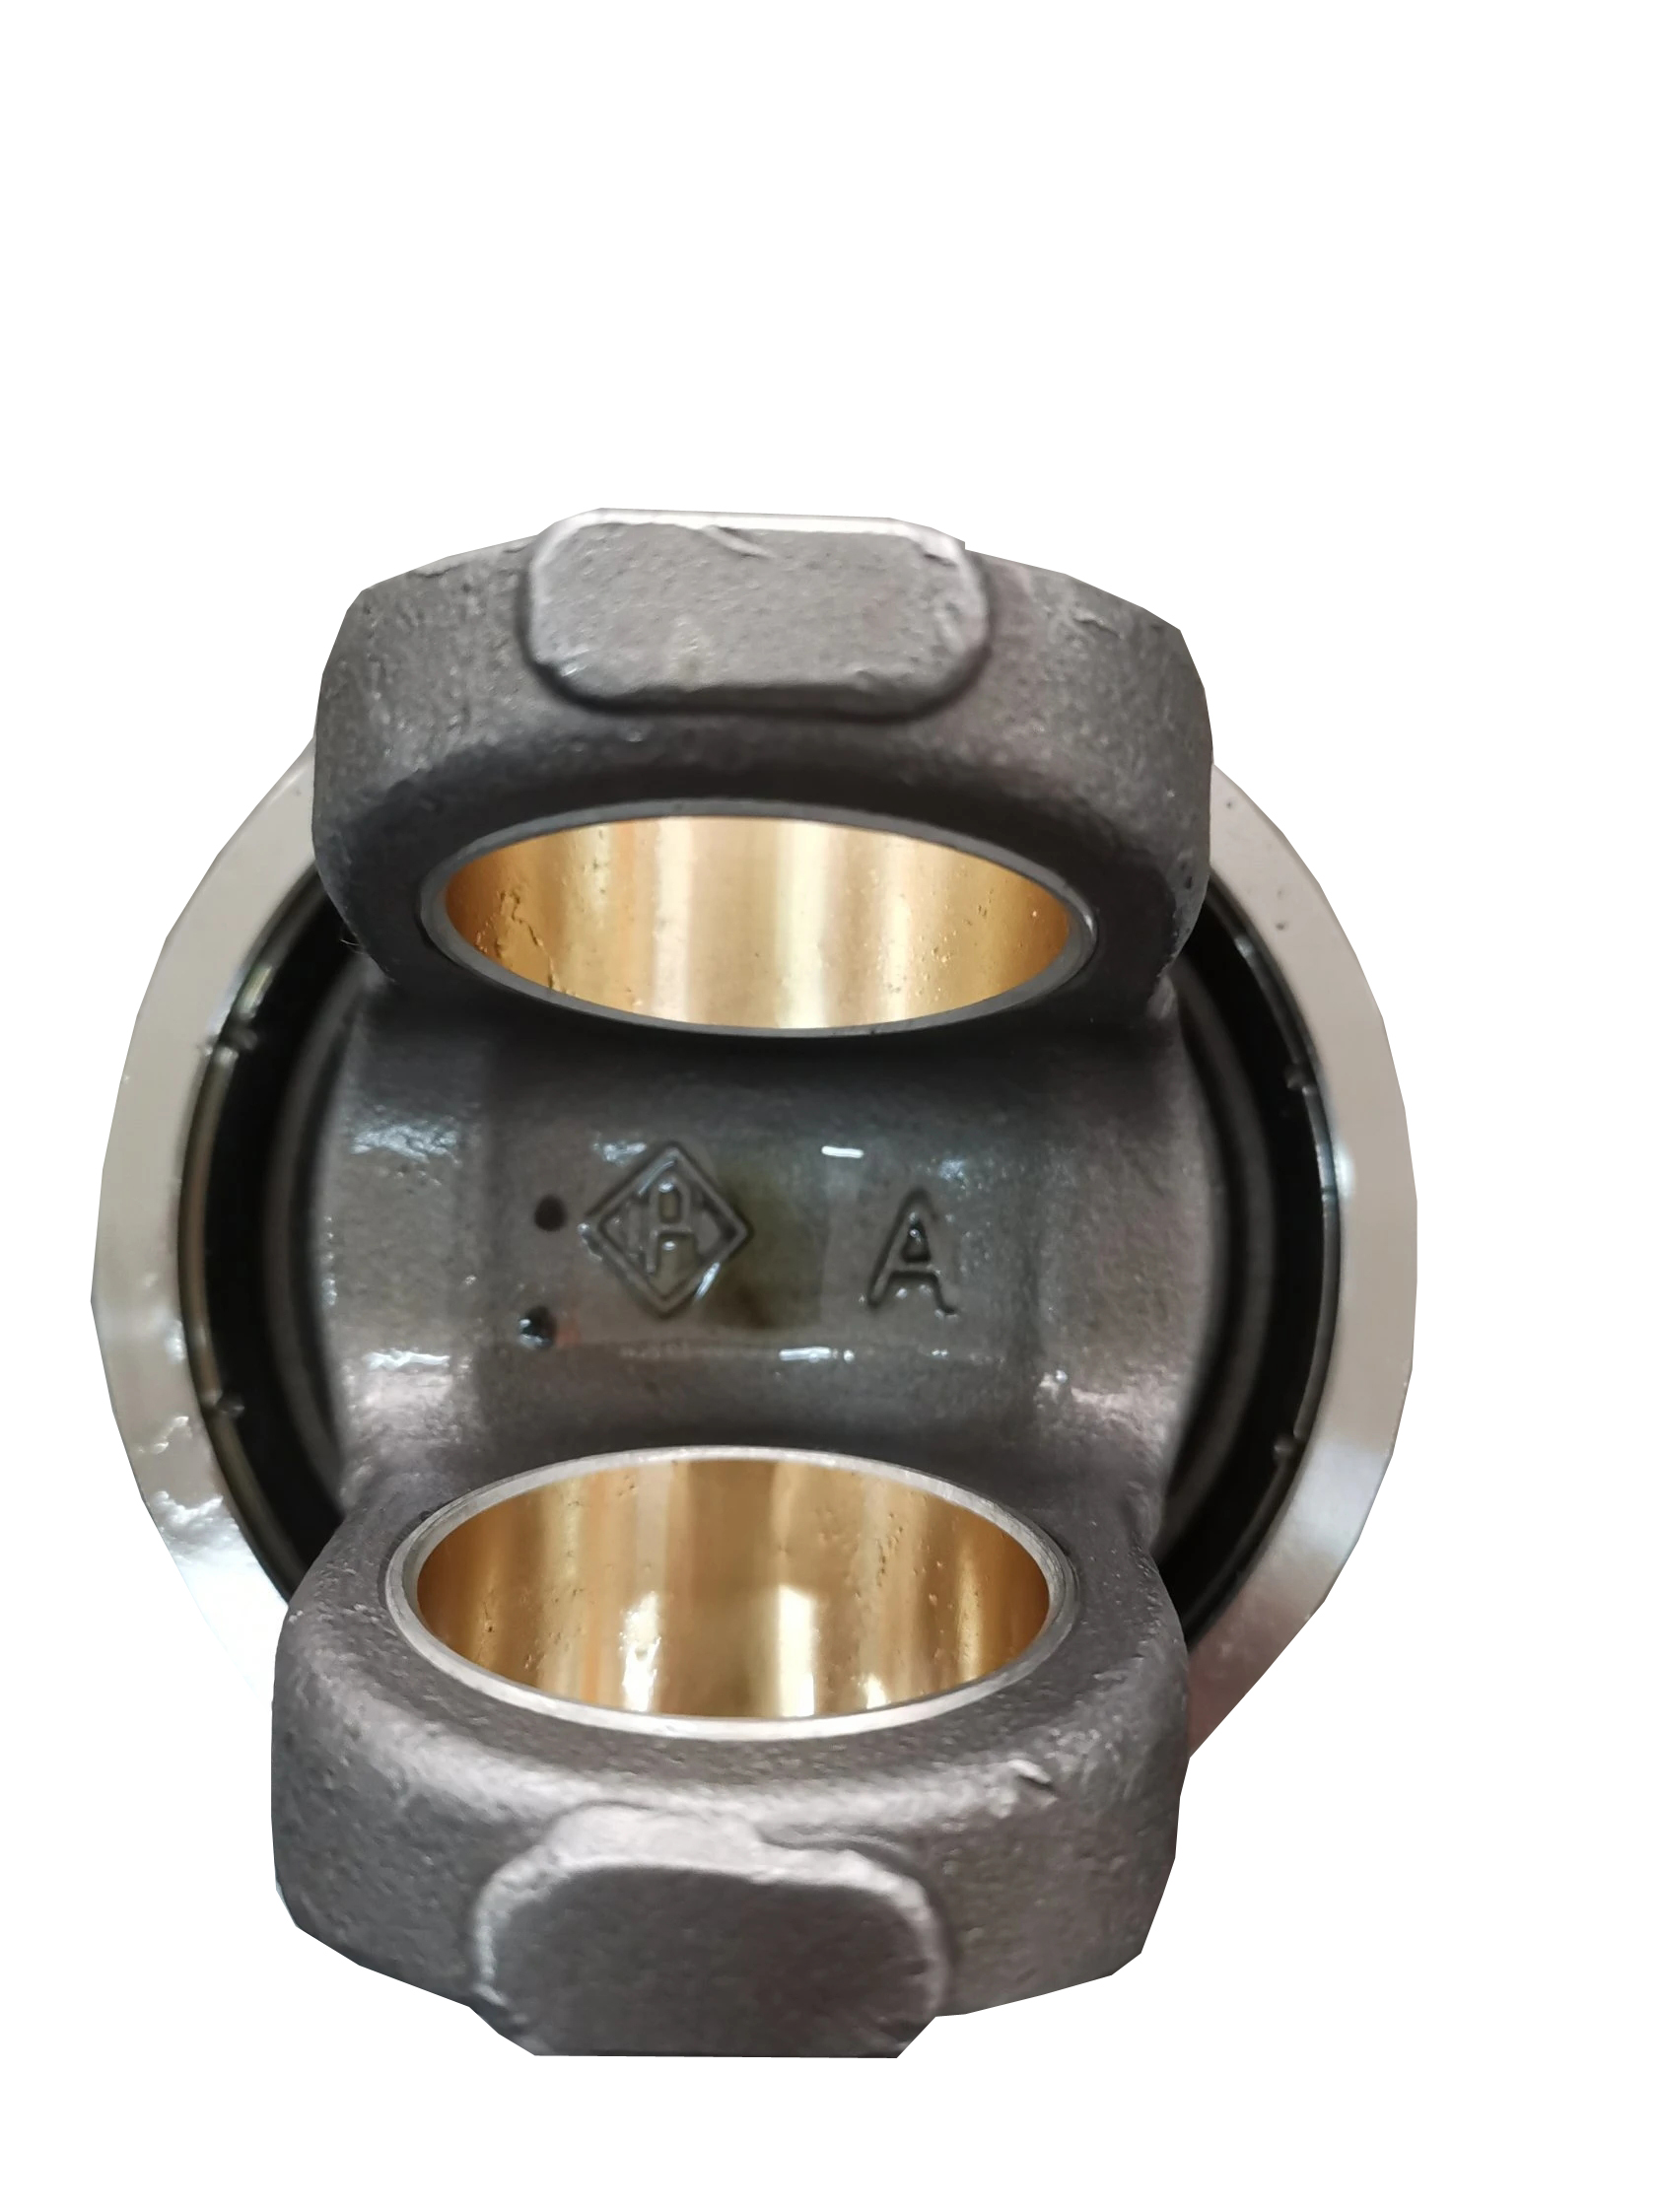 Investment Steel Casting Piston for CAT 3116 Engine Aftersales Market